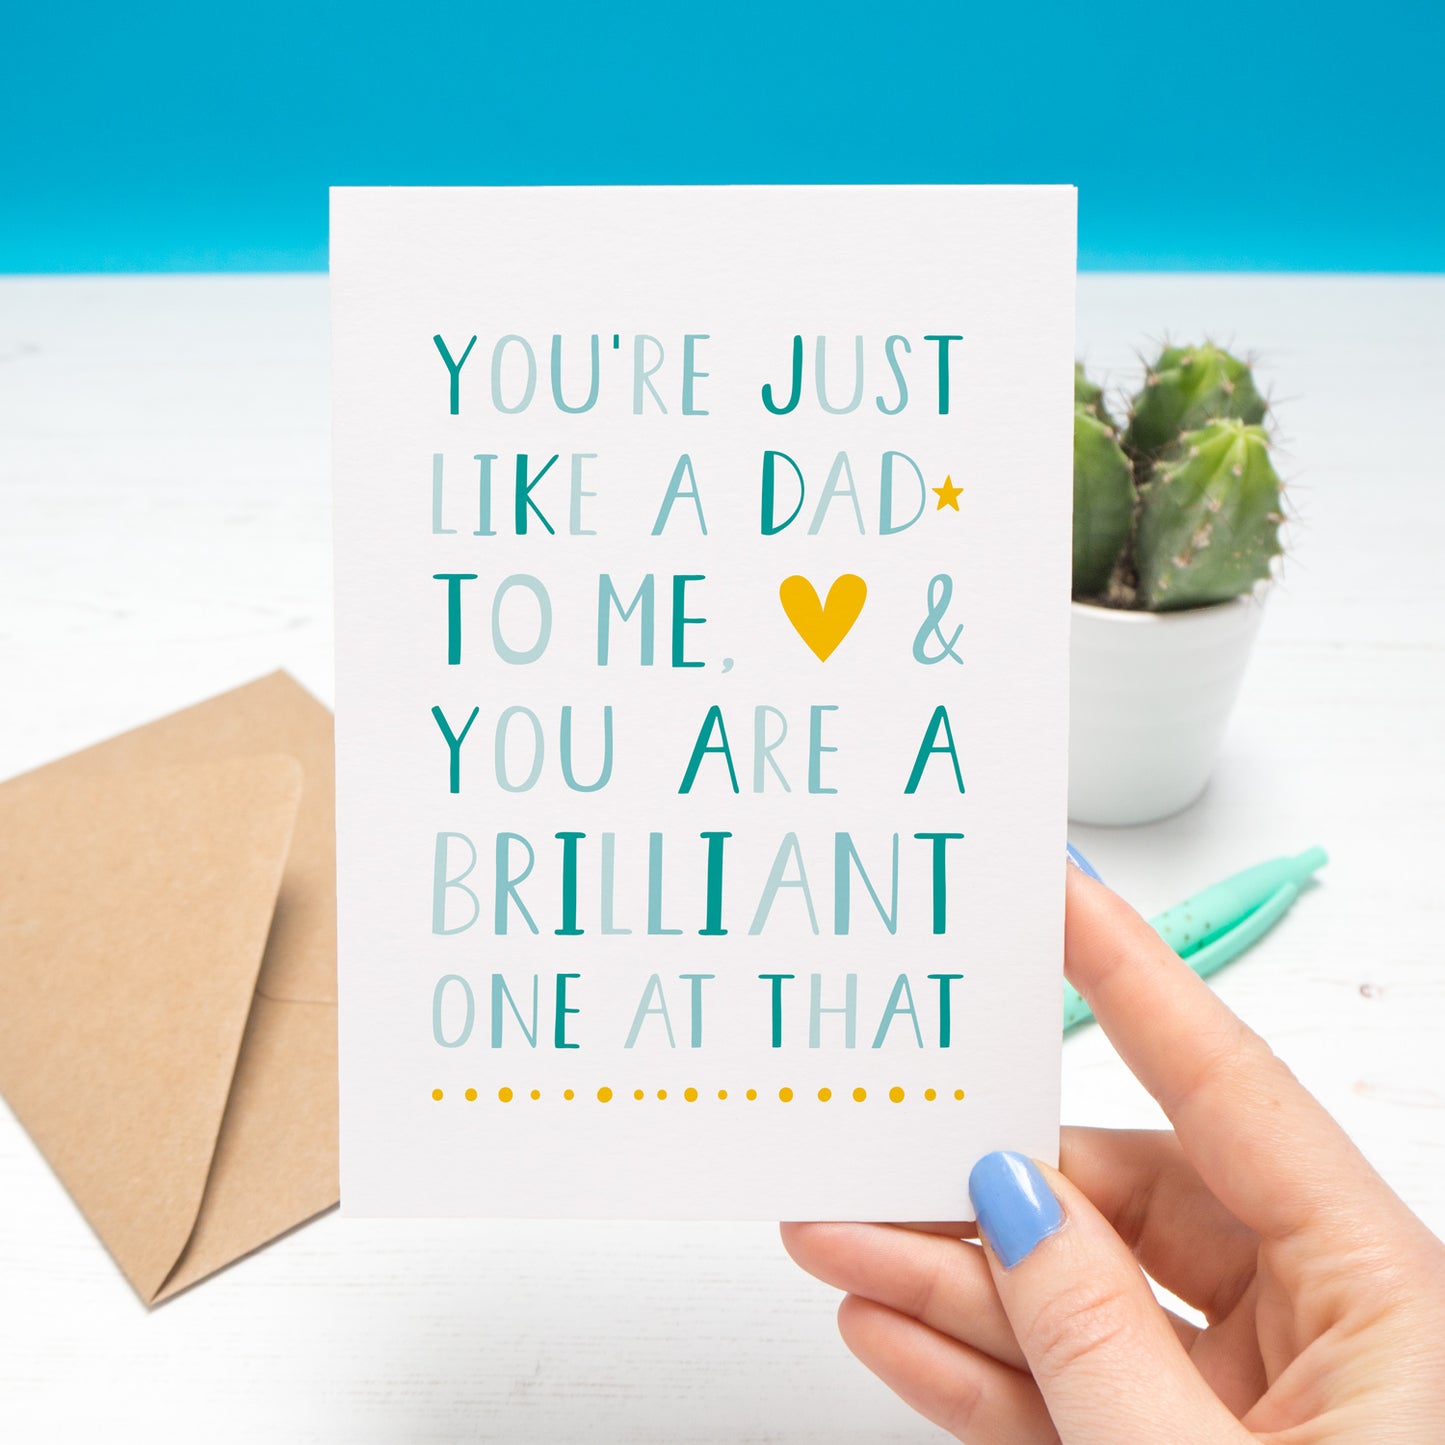 'You're just like a dad to me and you are a brilliant one at that' - plain card in blue